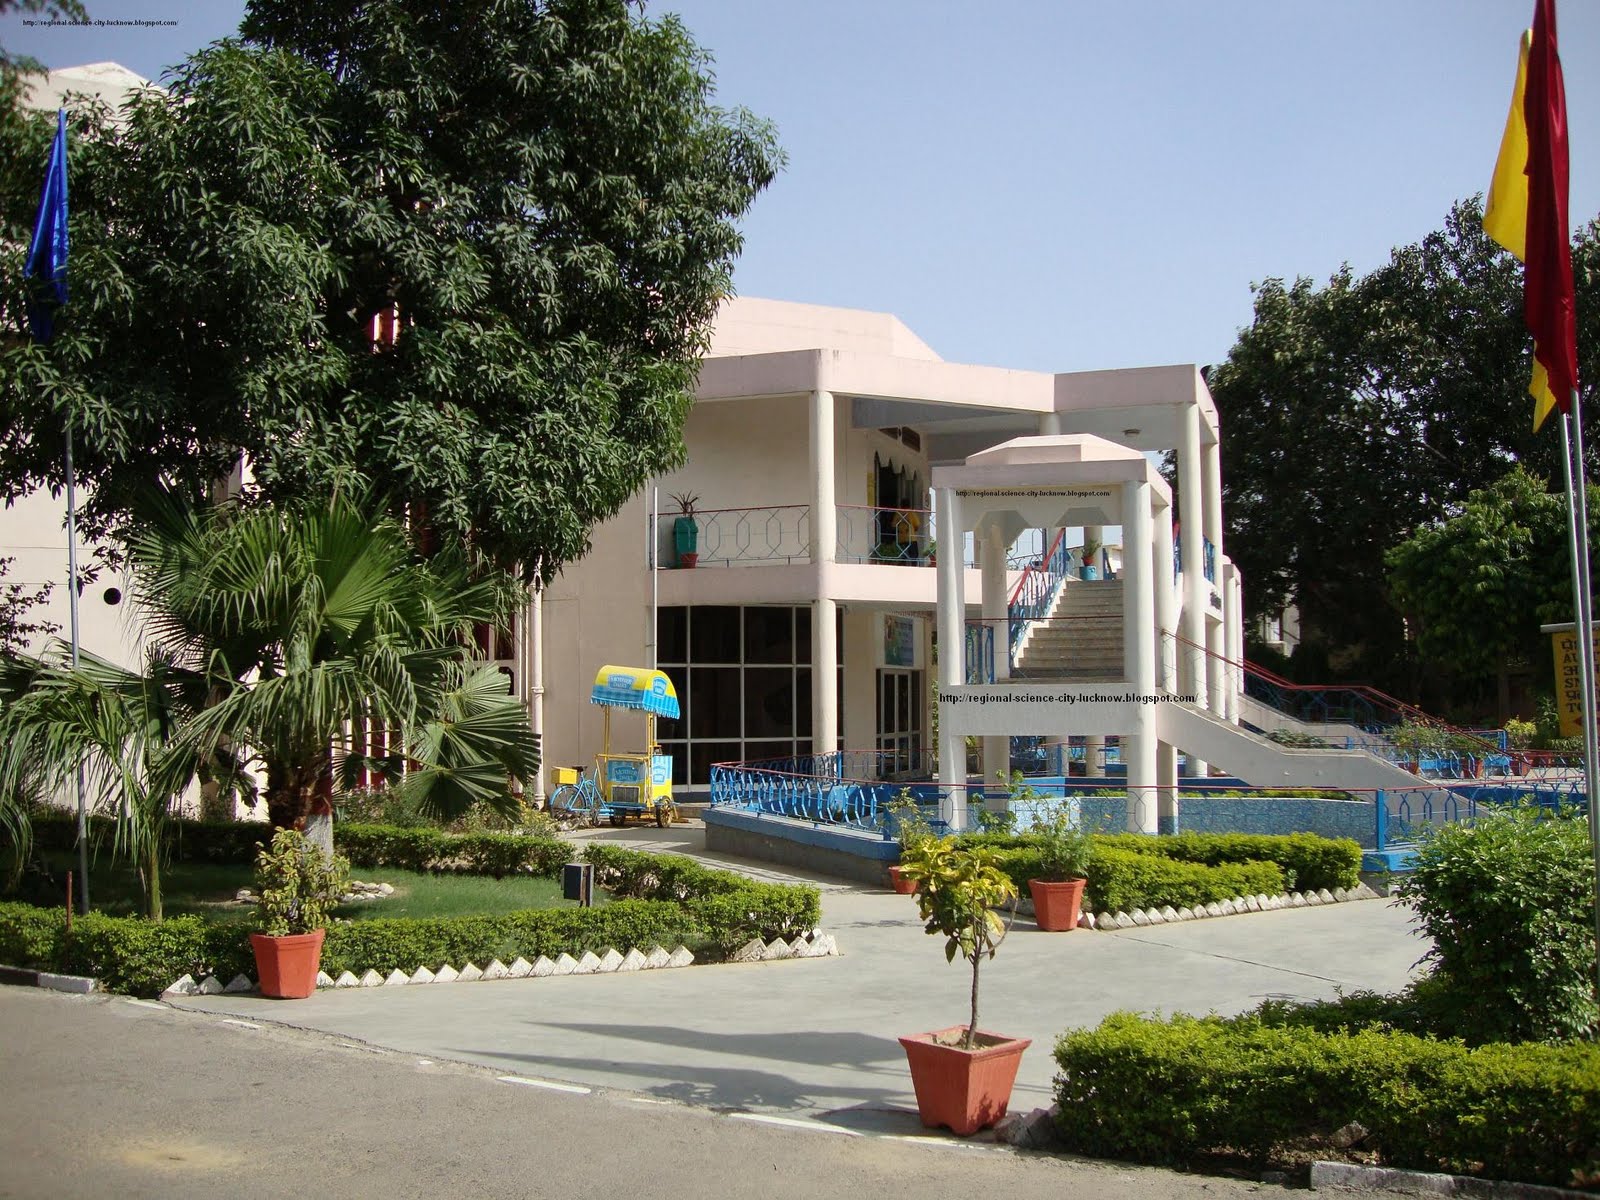 Welcome to Regional Science City, Lucknow